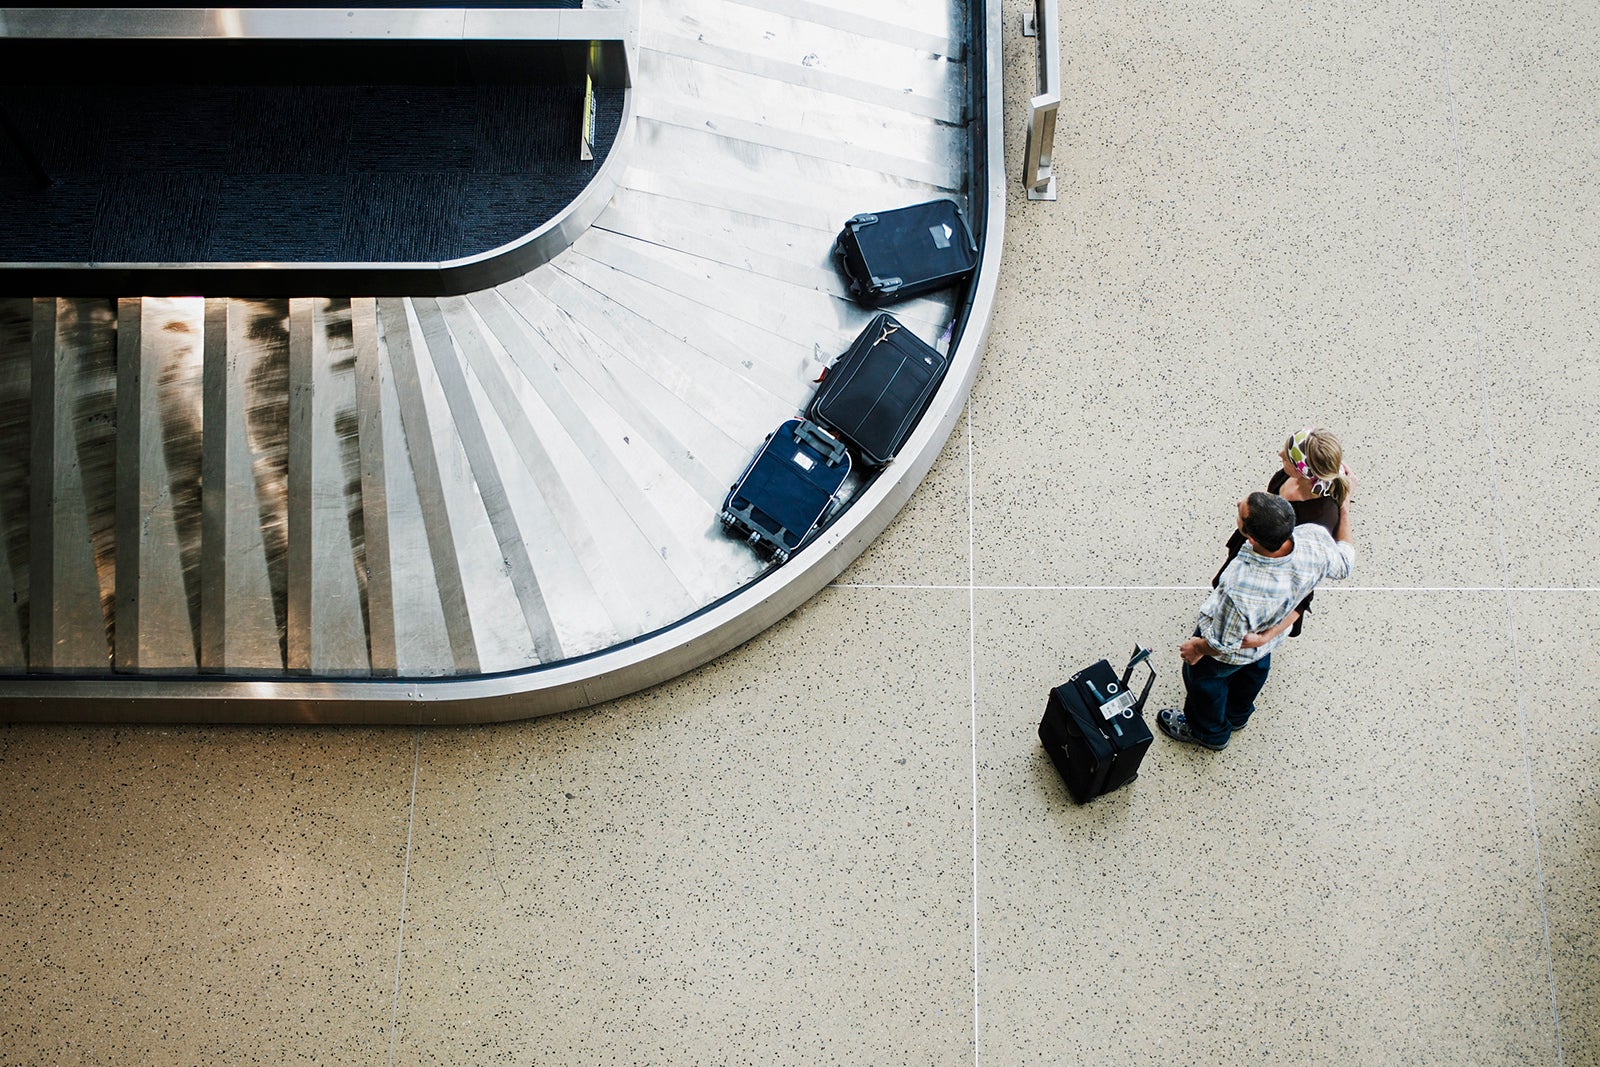 Flight Delays Are Common, Travel Insurance Is Your Best Friend